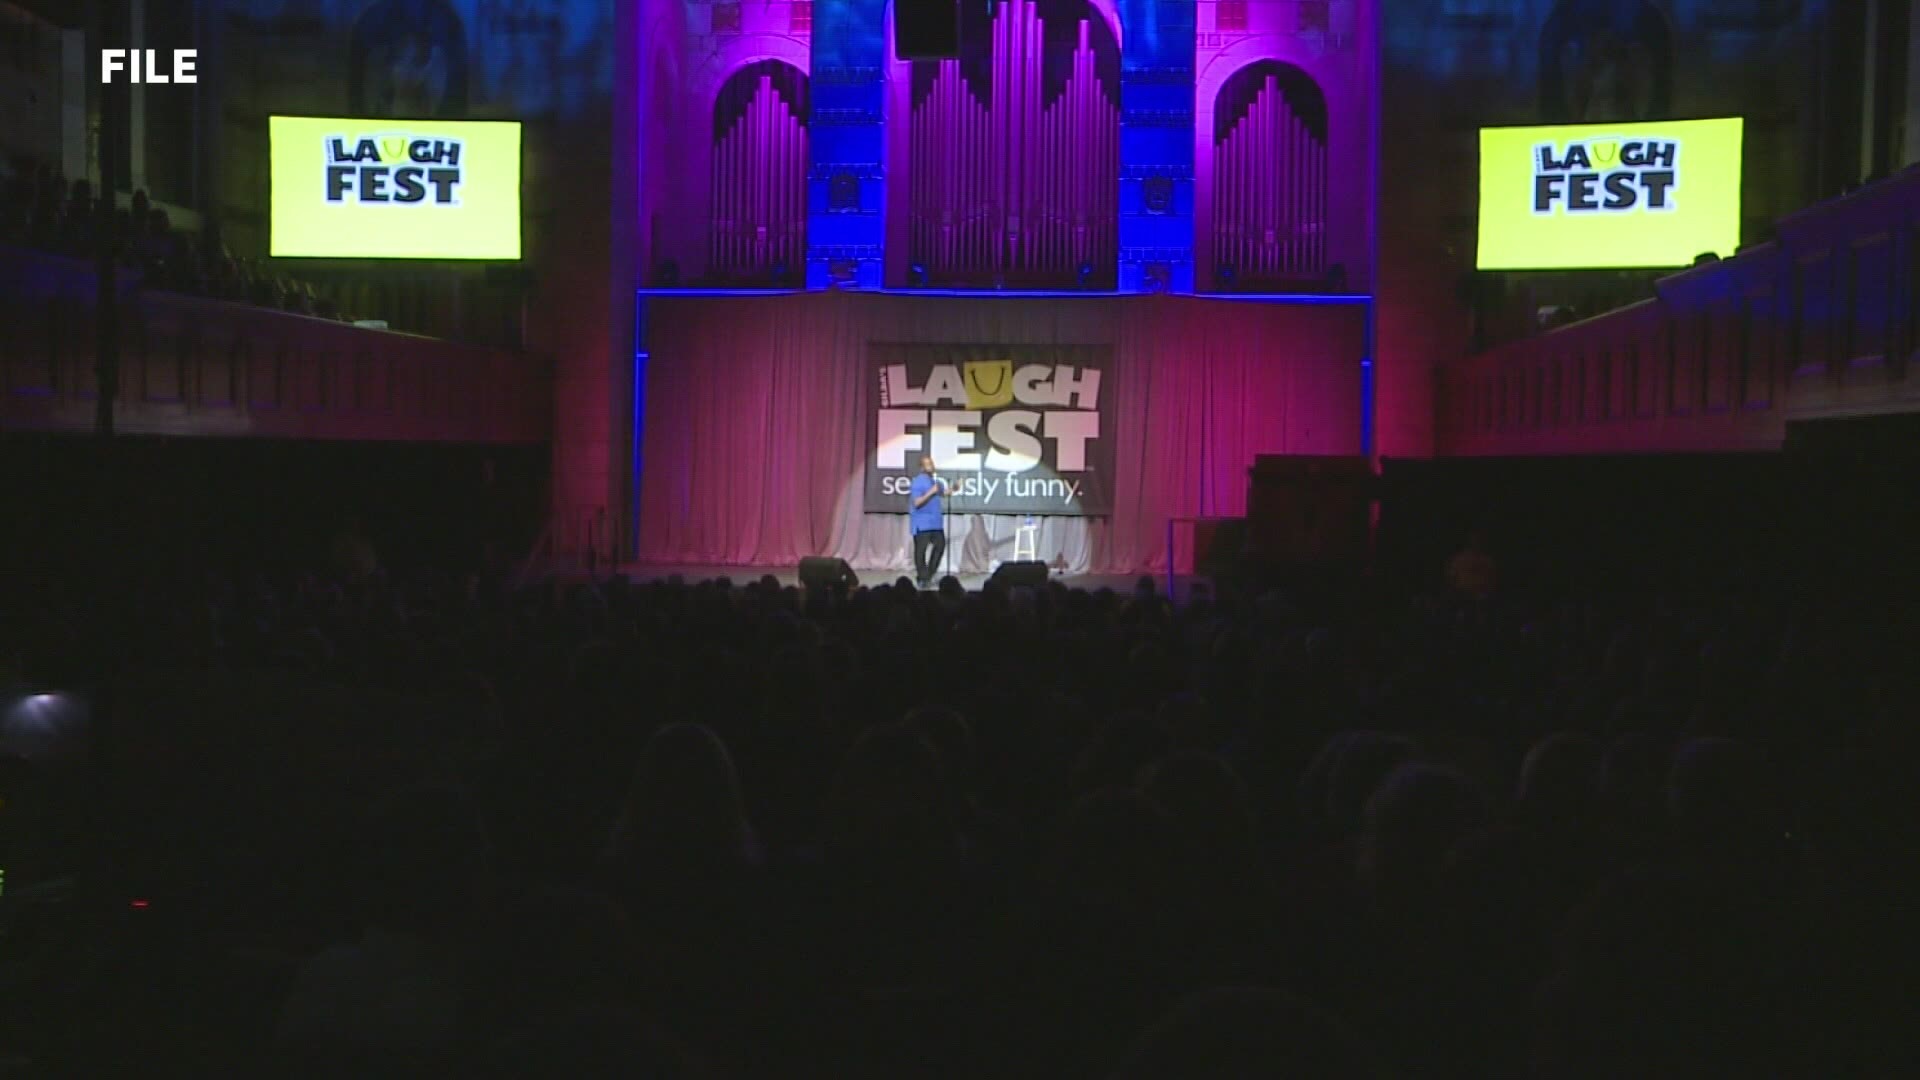 Thursday kicks off the start of the 11th annual LaughFest, which went virtual due to the pandemic